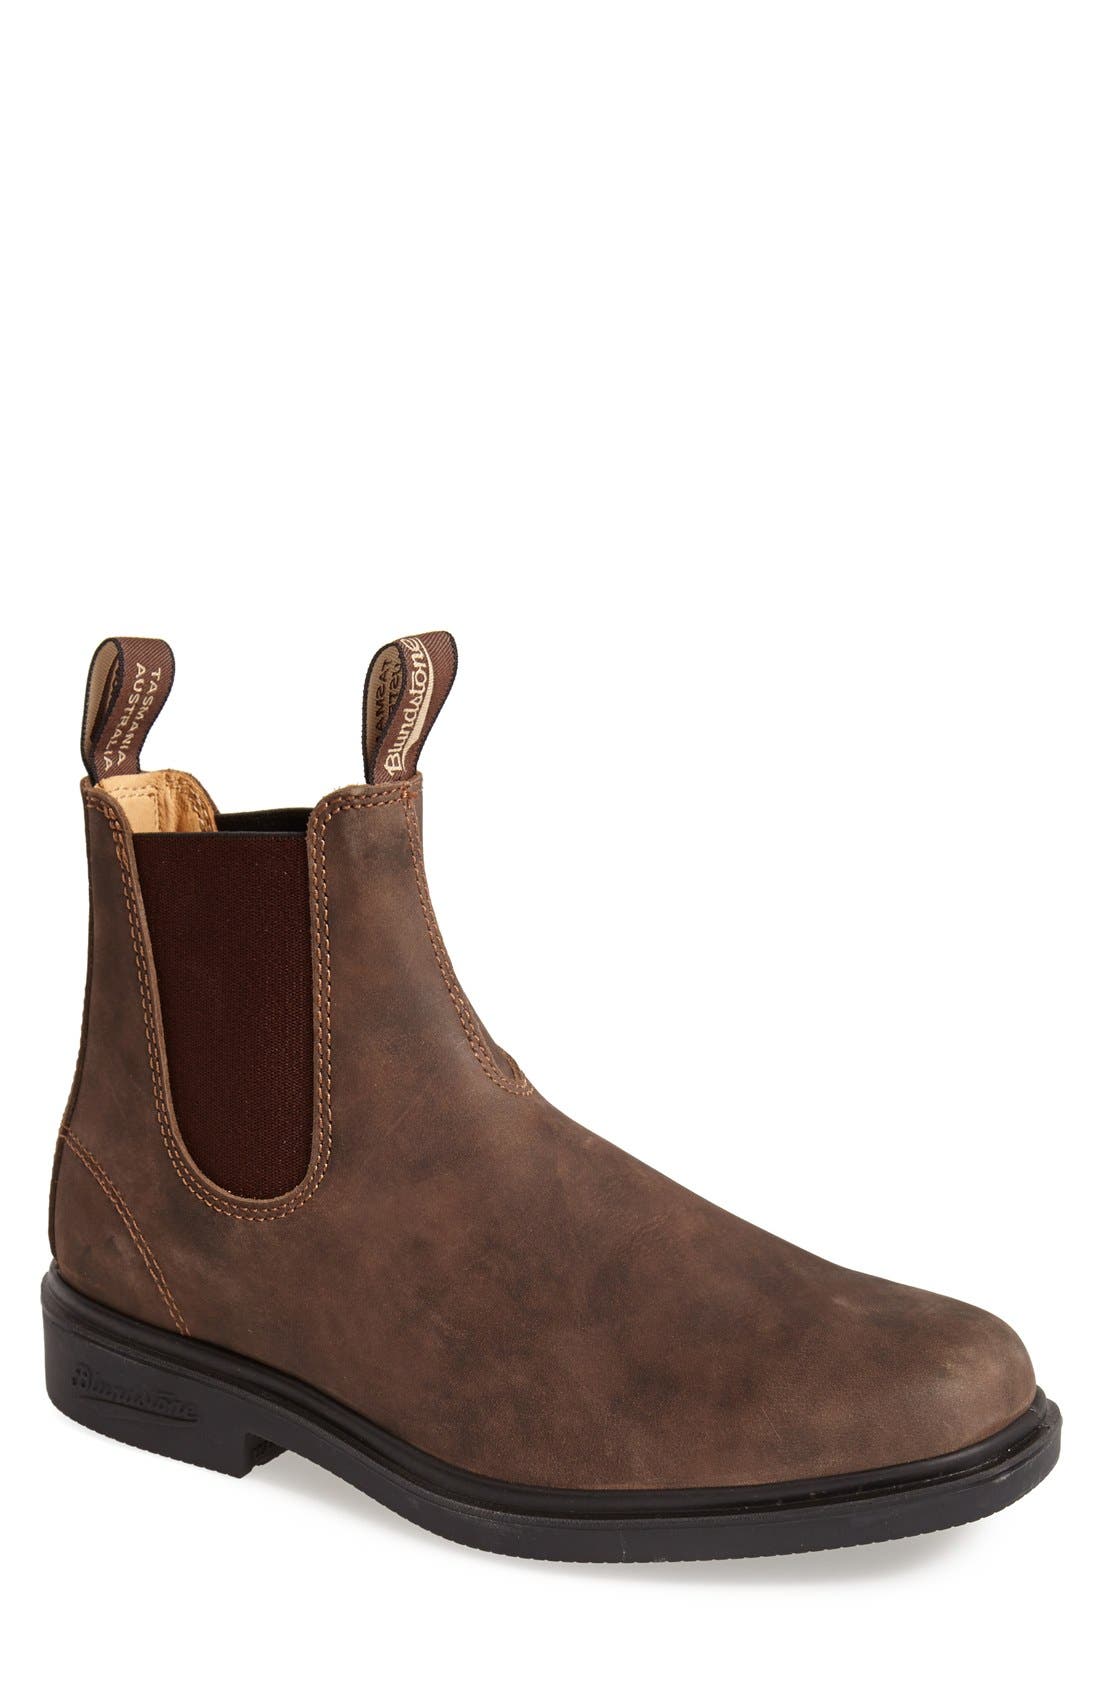 blundstone boots nordstrom